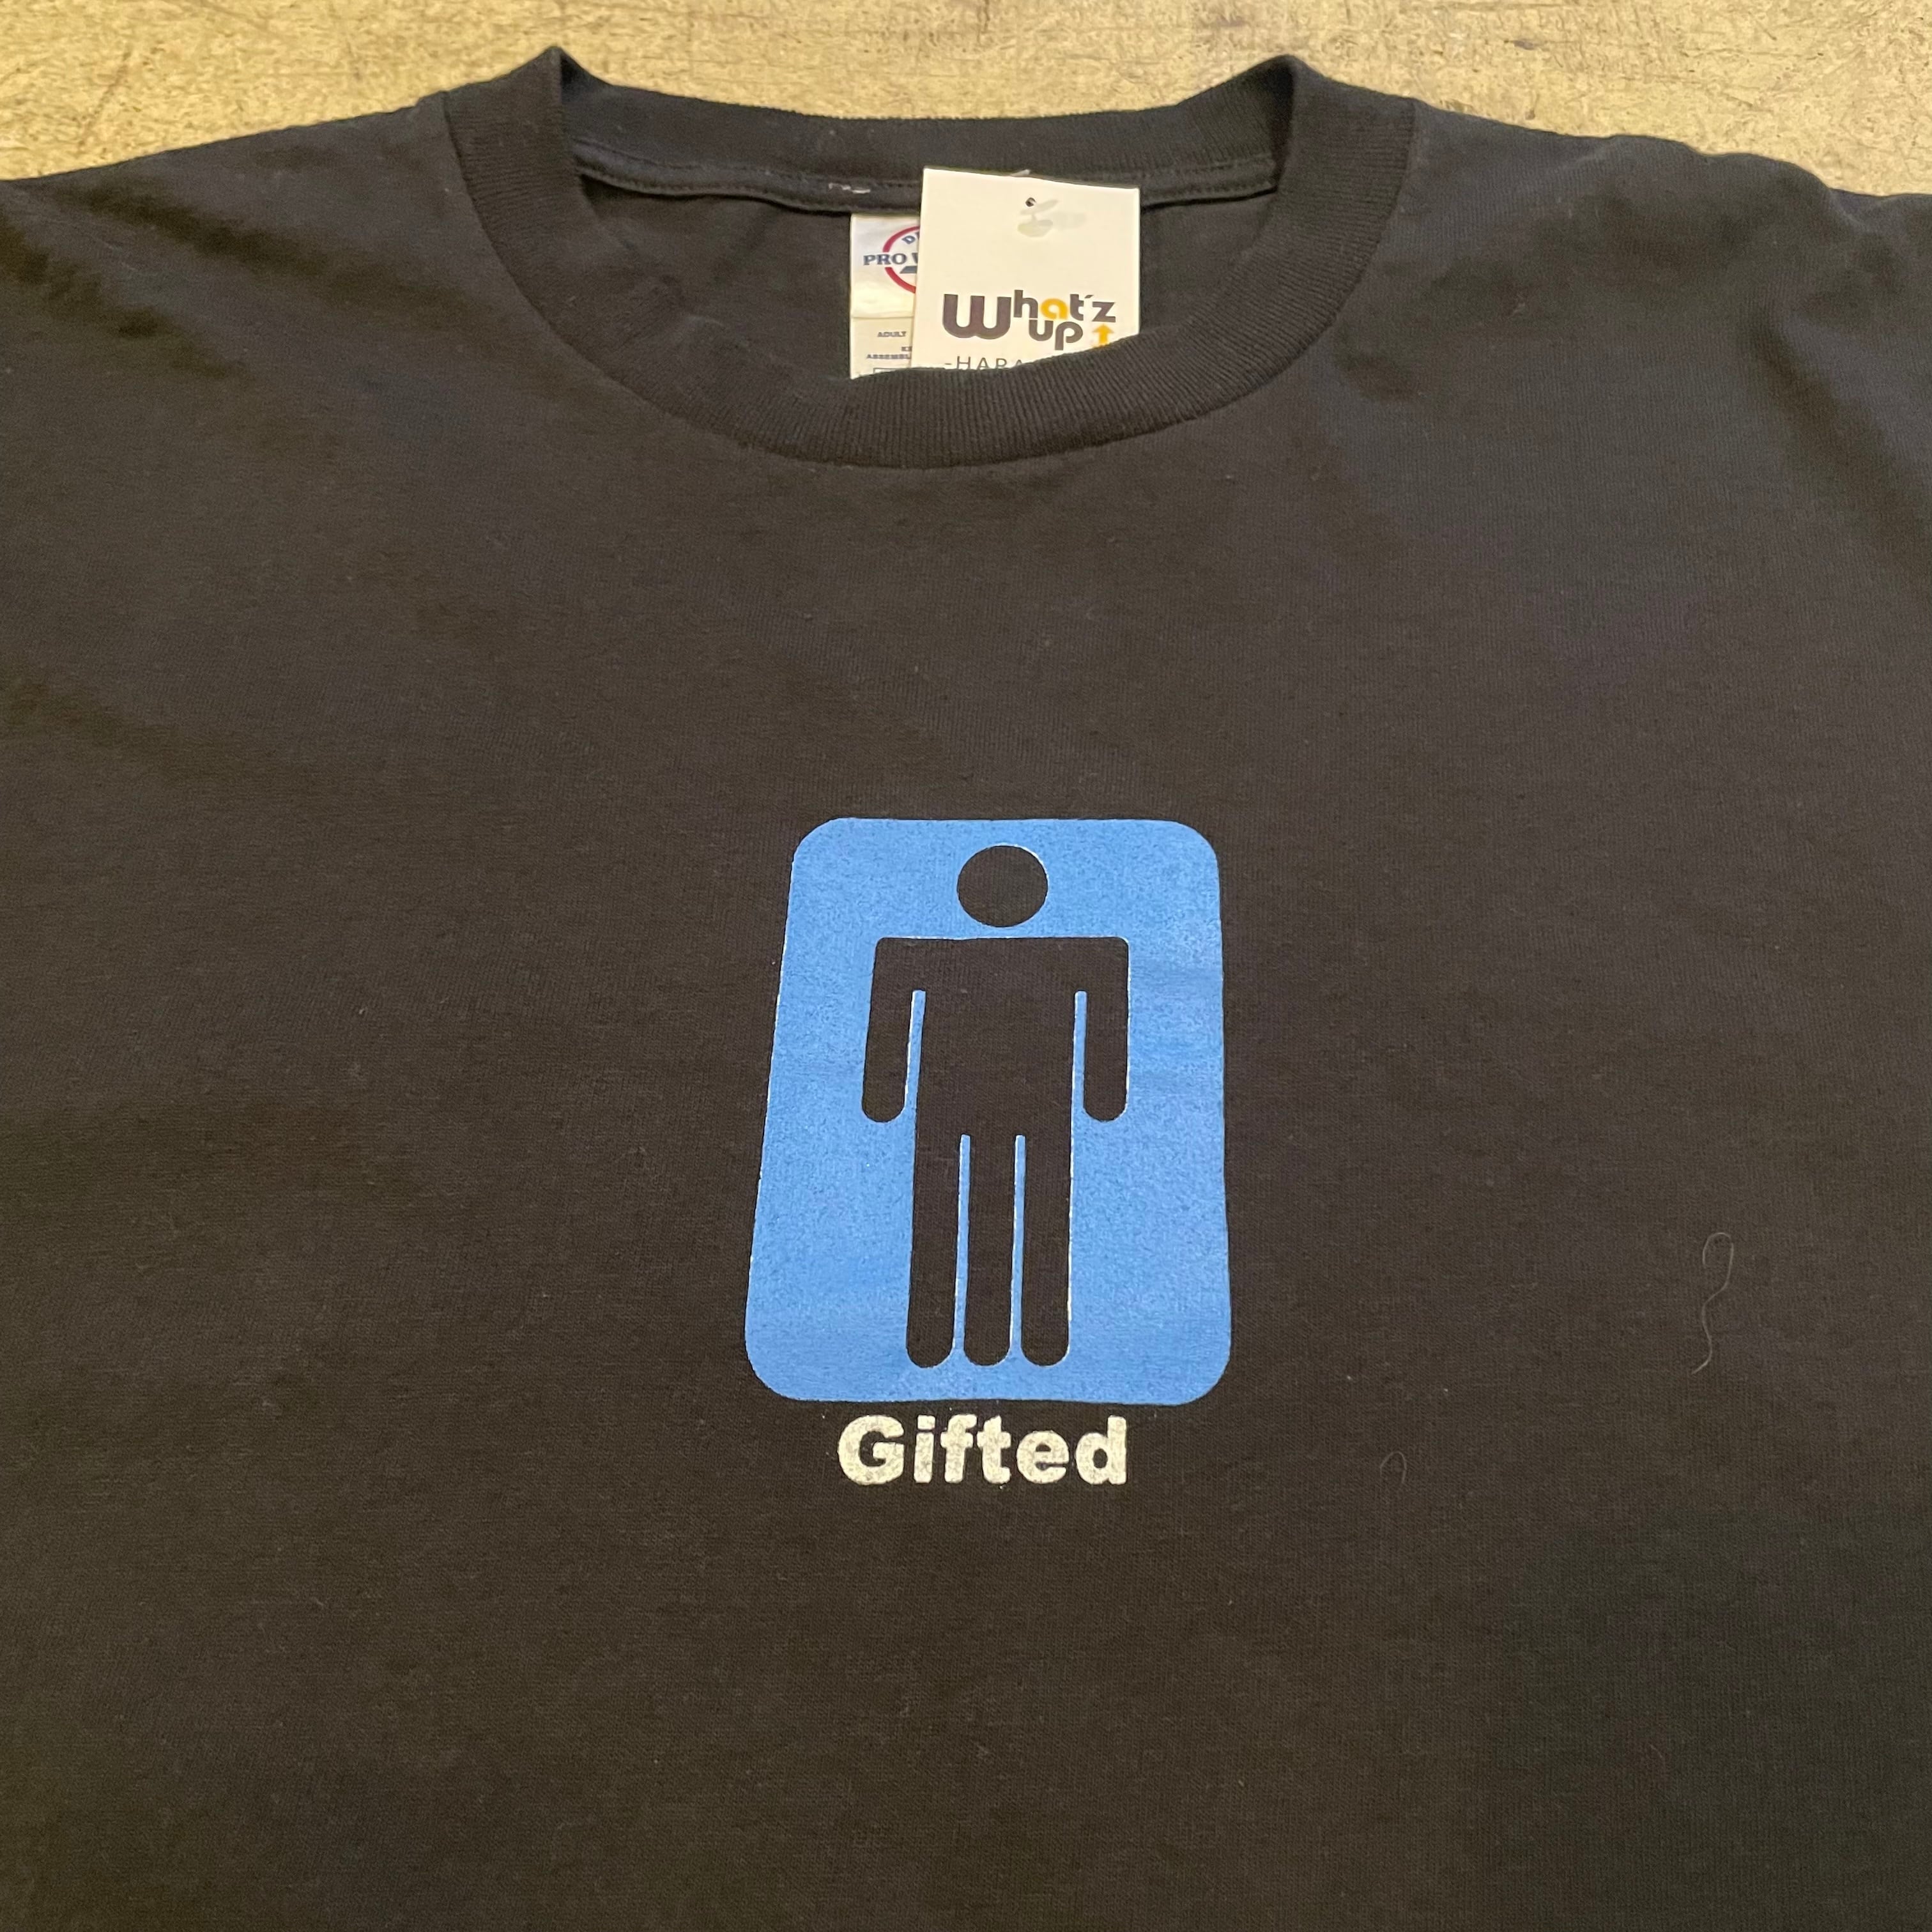 00s Gifted T-shirt | What'z up